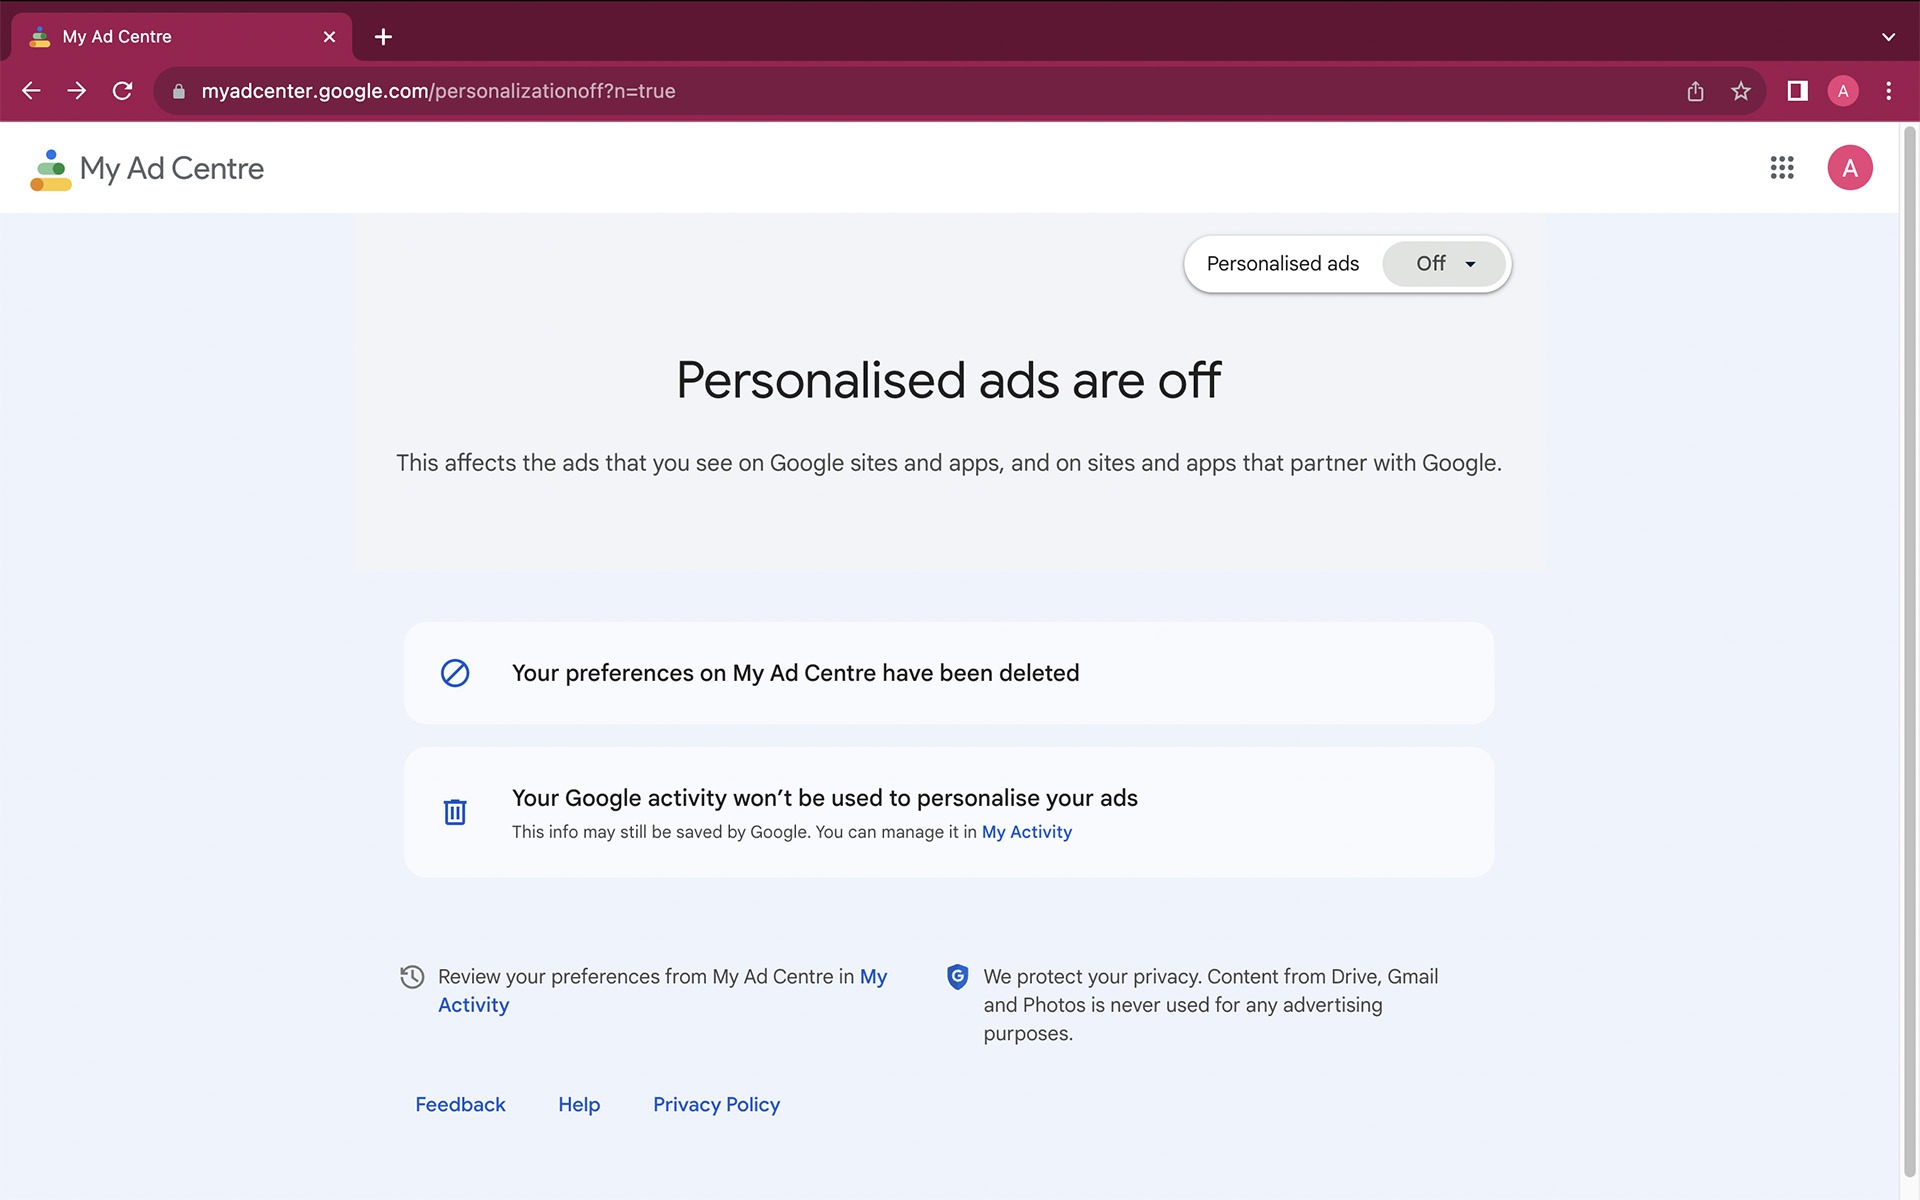 How to disable personalized ads in Google My Ad Centre